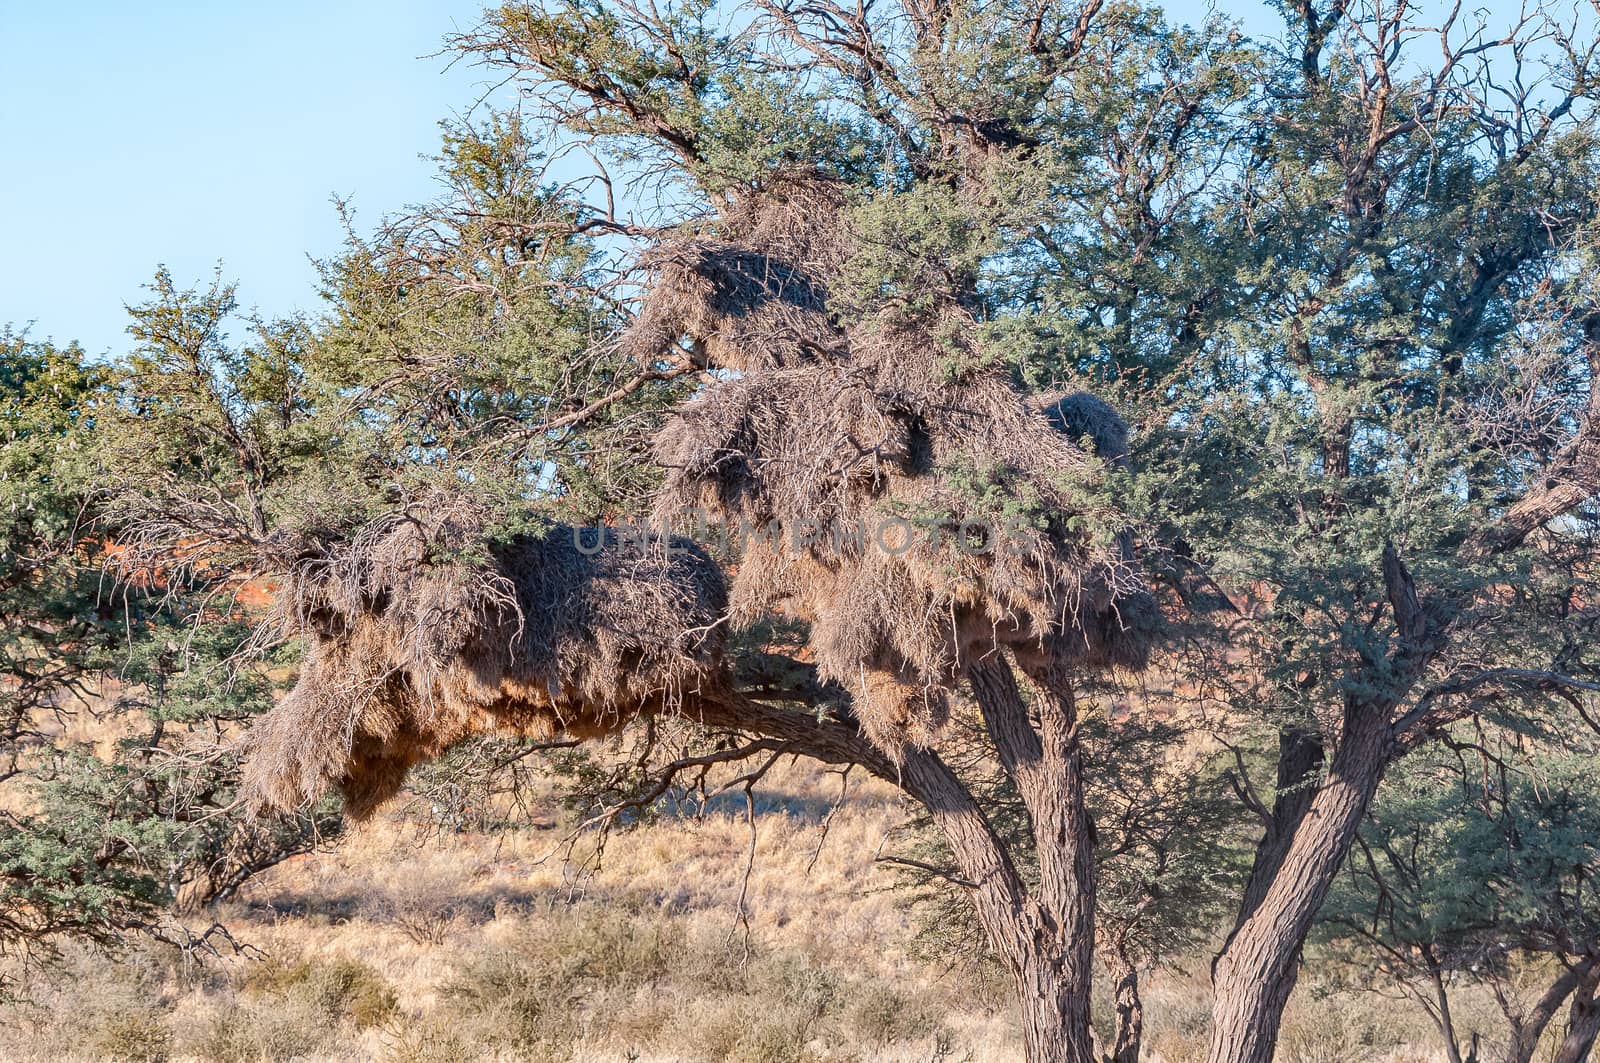 Communal bird nest in camel-thorn tree in the Kgalagadi by dpreezg